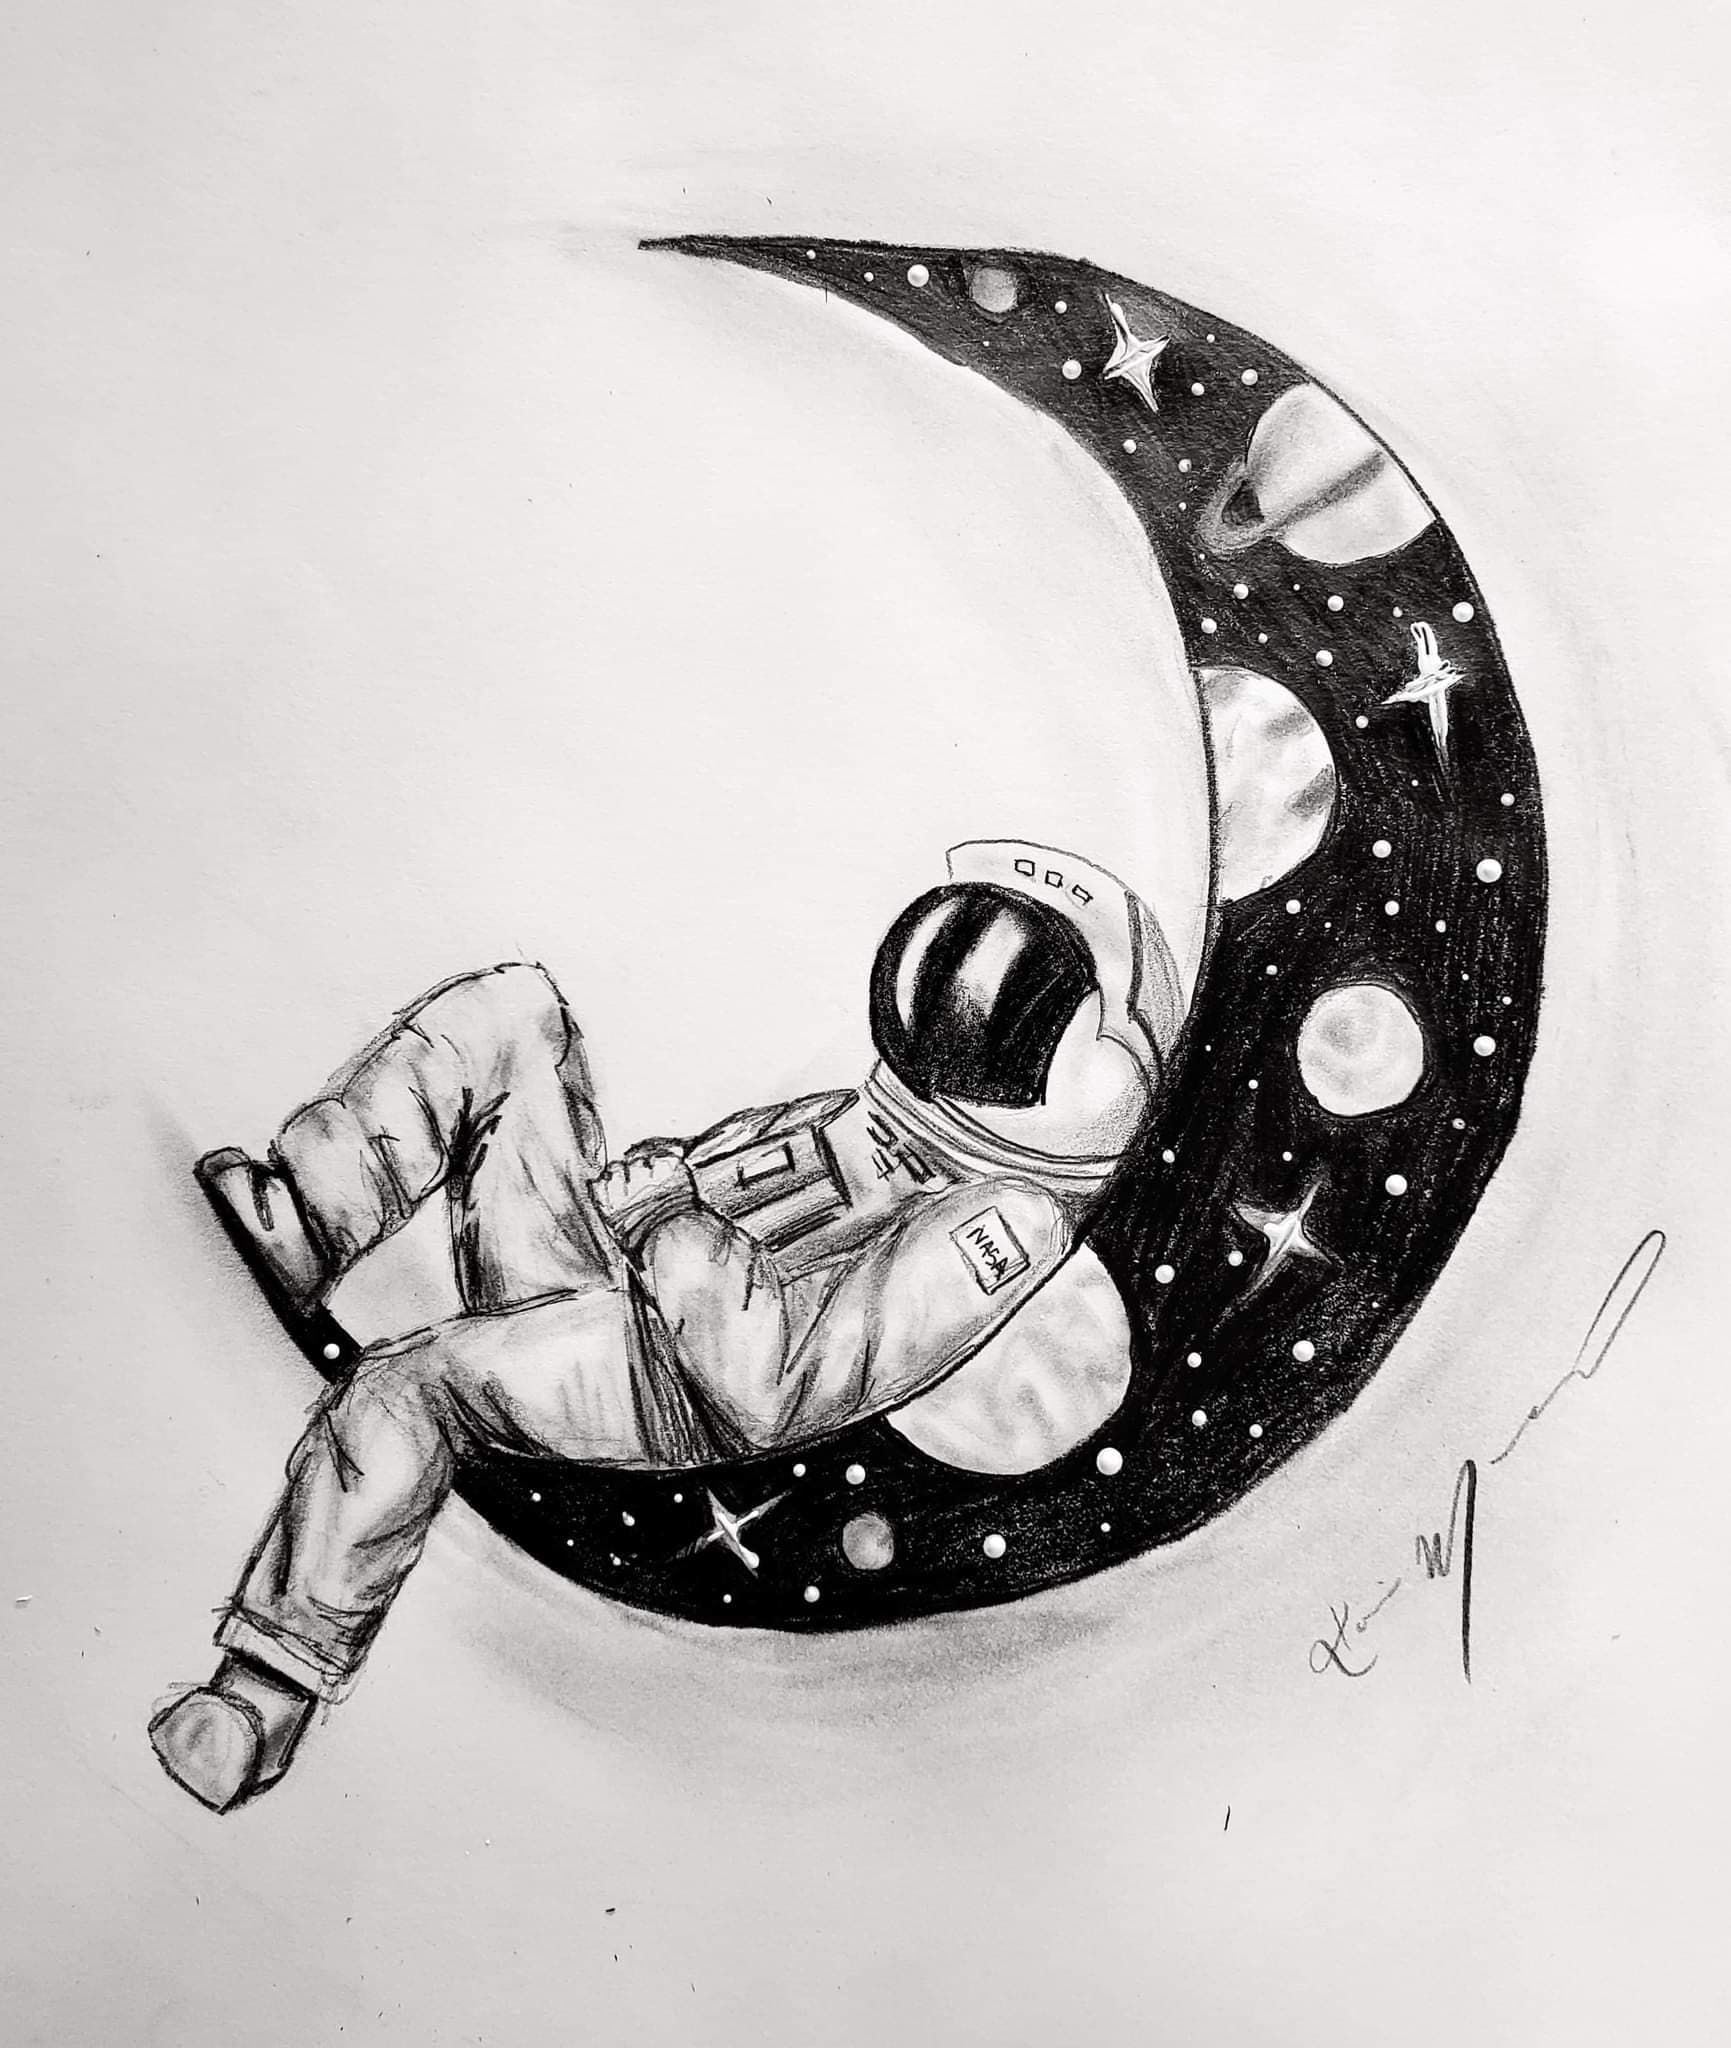 How to Draw an Astronaut Easy Step by Step - YouTube